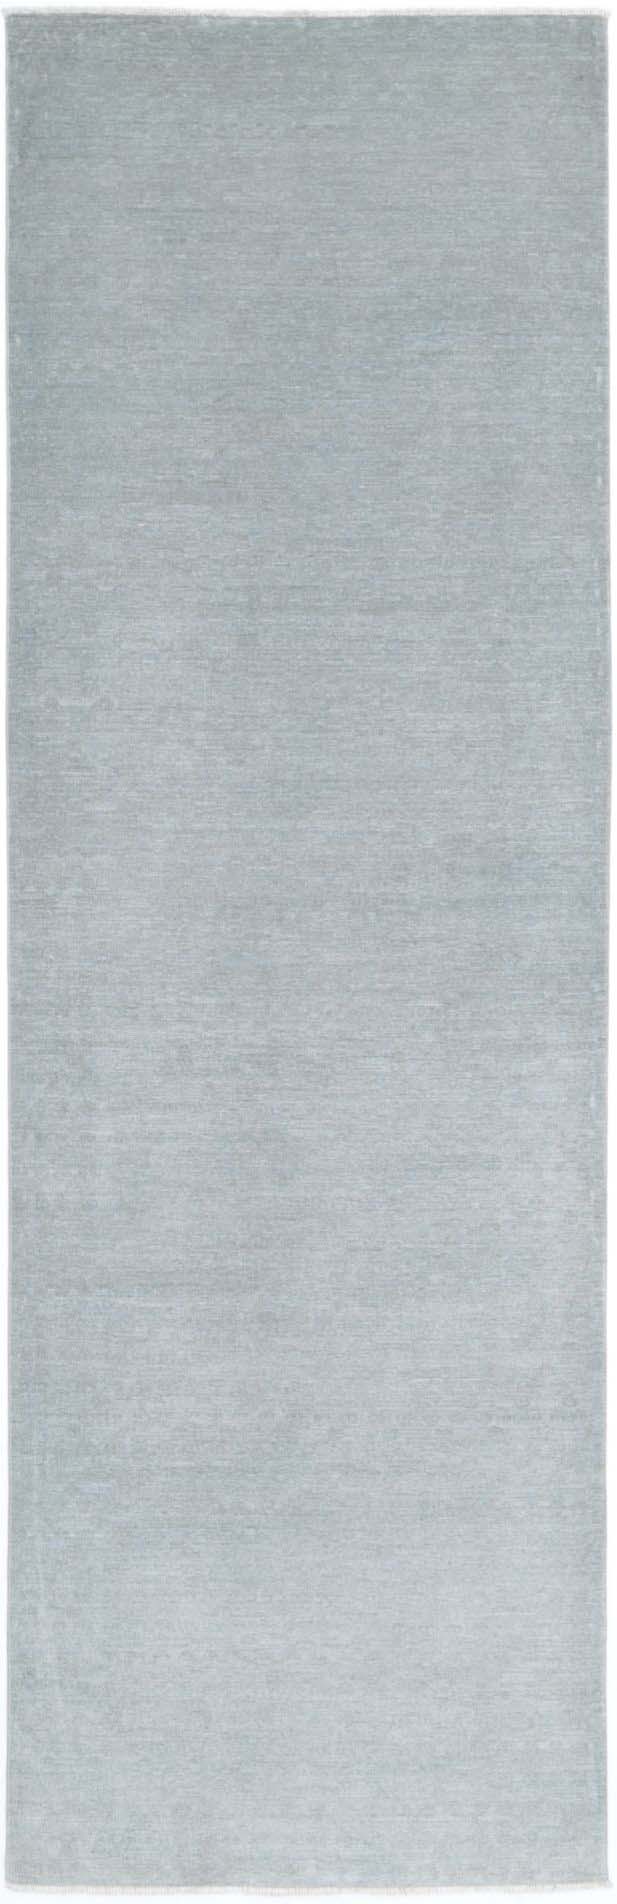 Hand Knotted Overdyed Wool Rug - 3'1'' x 11'1''